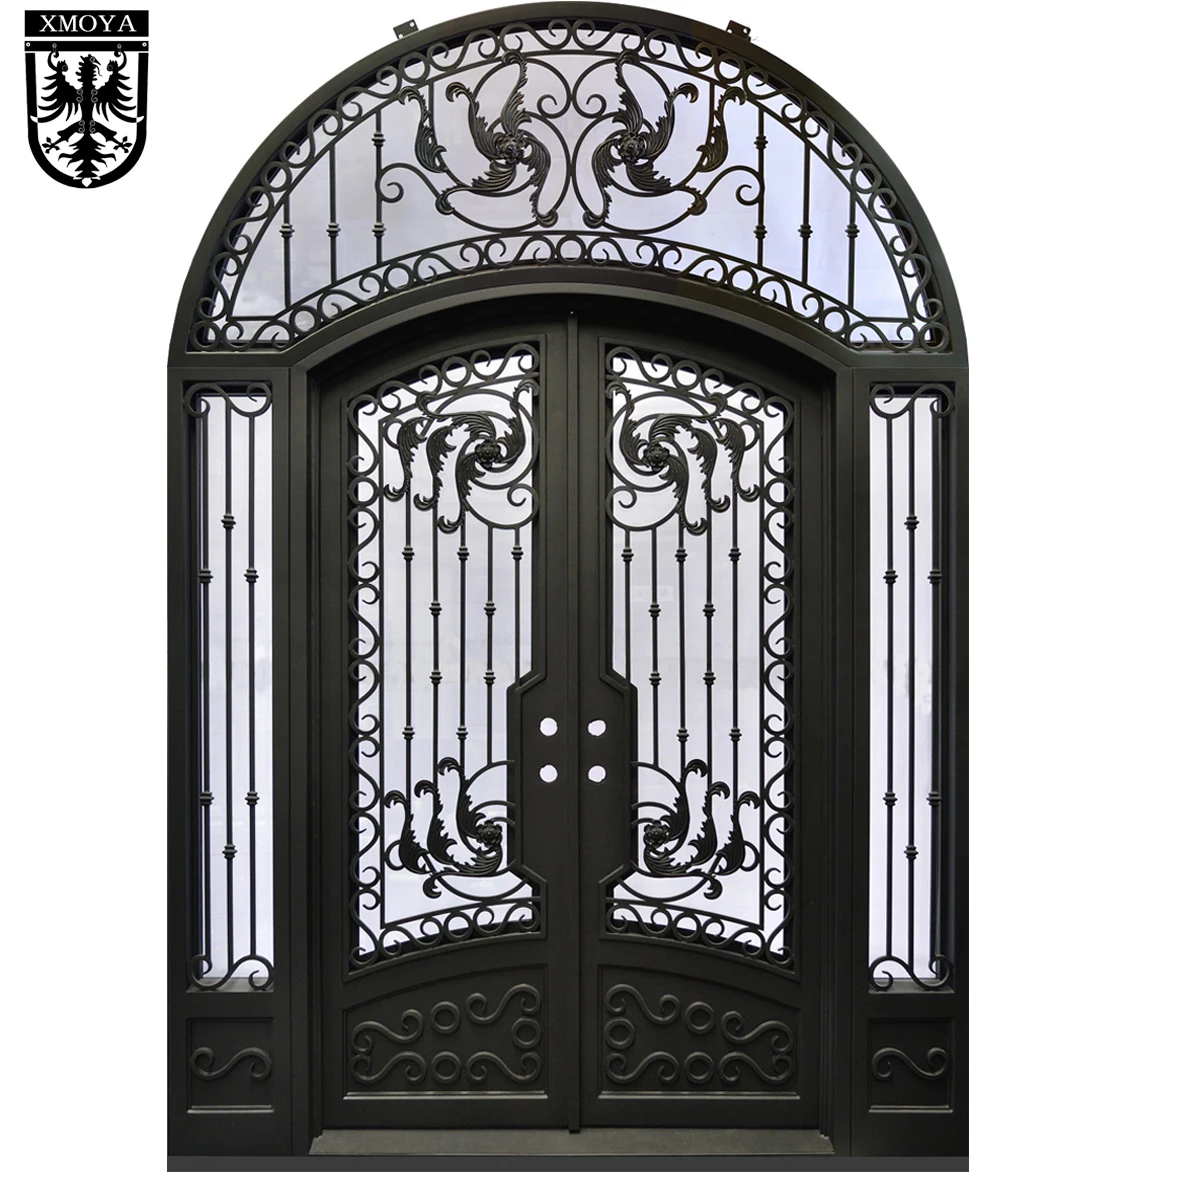 Lowes Expanded Security Wrought Iron Interior Entry Doors Buy Lowes Wrought Iron Security Doors Wrought Iron Door Entry Wrought Iron Interior Door